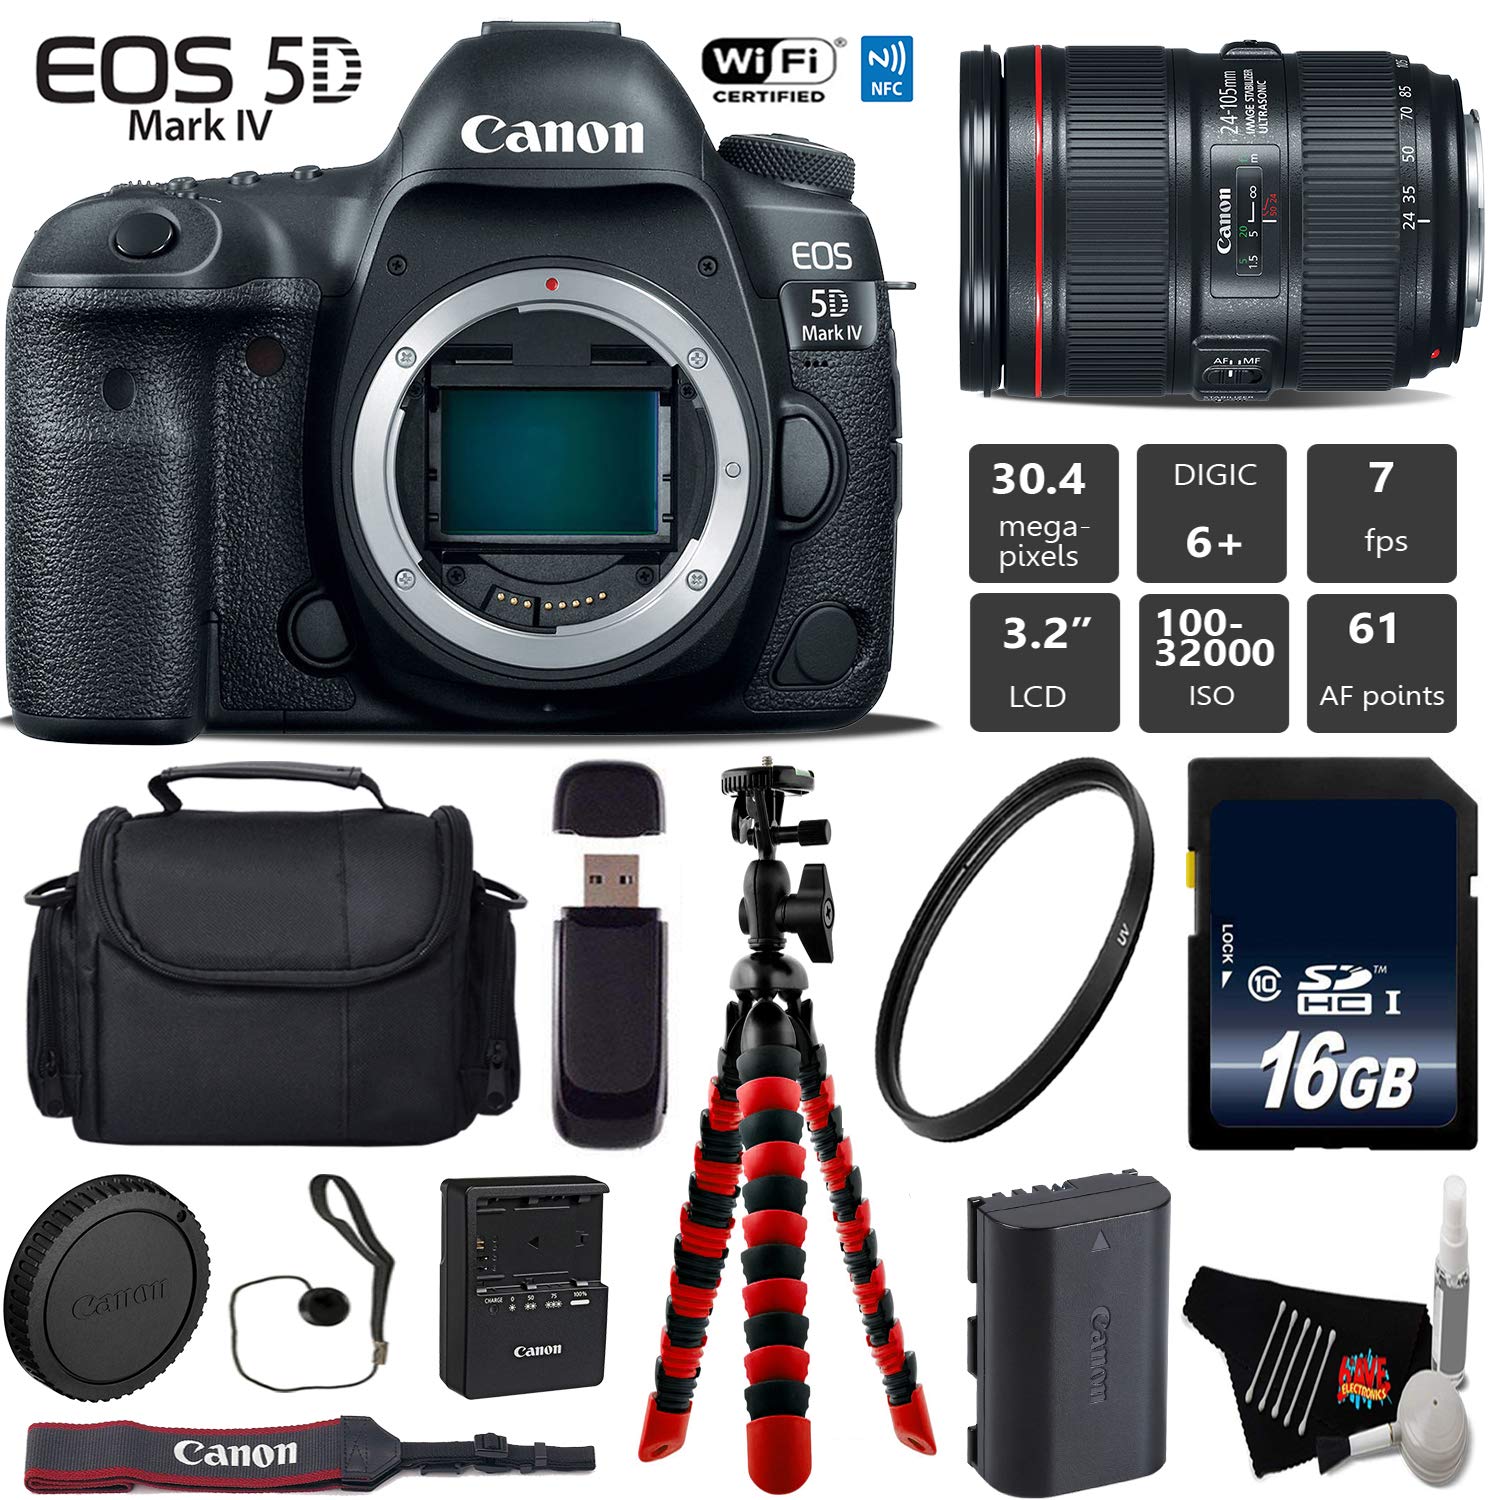 Canon EOS 5D Mark IV DSLR Camera with 24-105mm f/4L II Lens + Wireless Remote + UV Protection Filter + Case + Wrist Strap Base Bundle